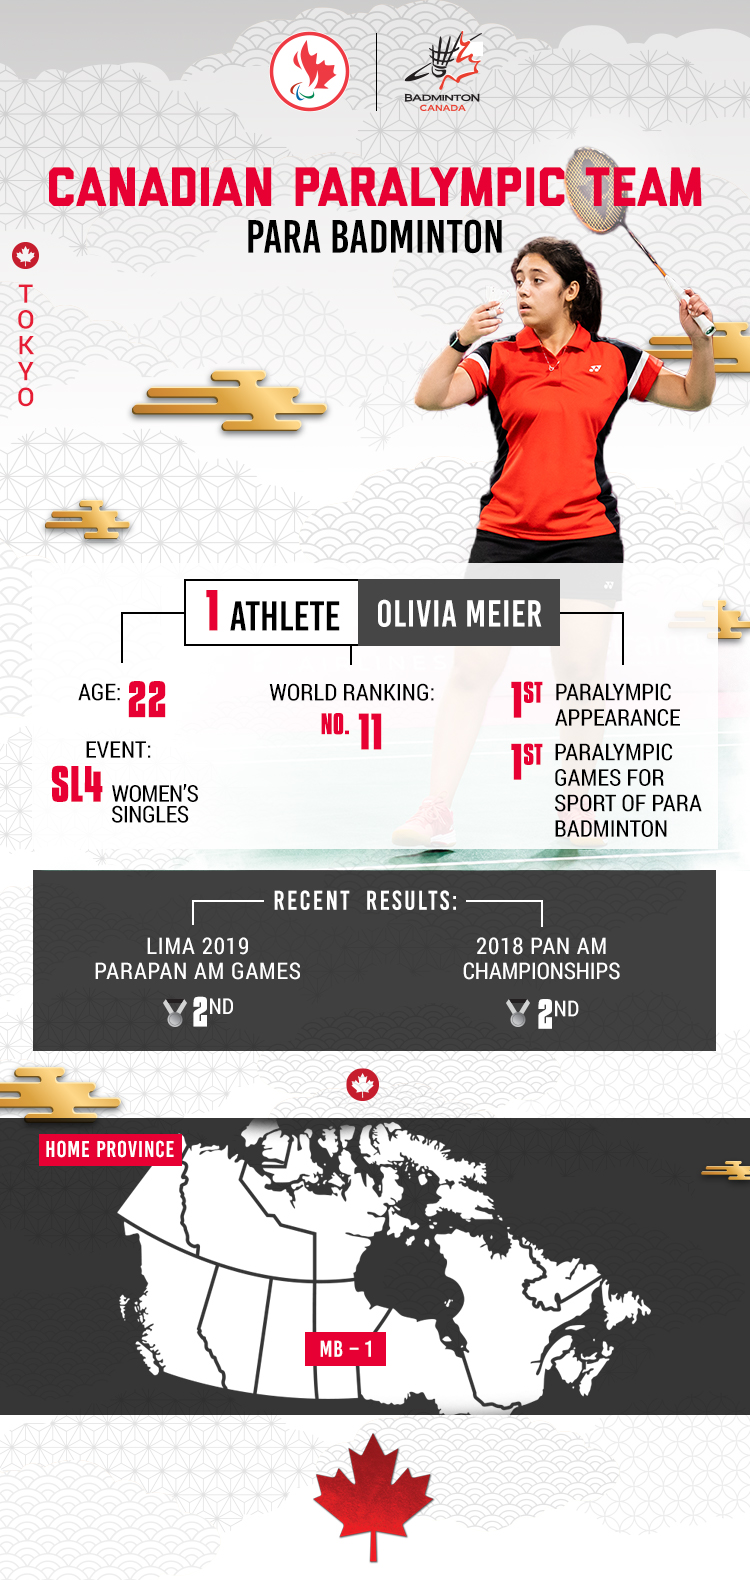 An infographic showing various stats about Olivia Meier, who will represent Canada in Para badminton at the Tokyo 2020 Paralympic Games. 